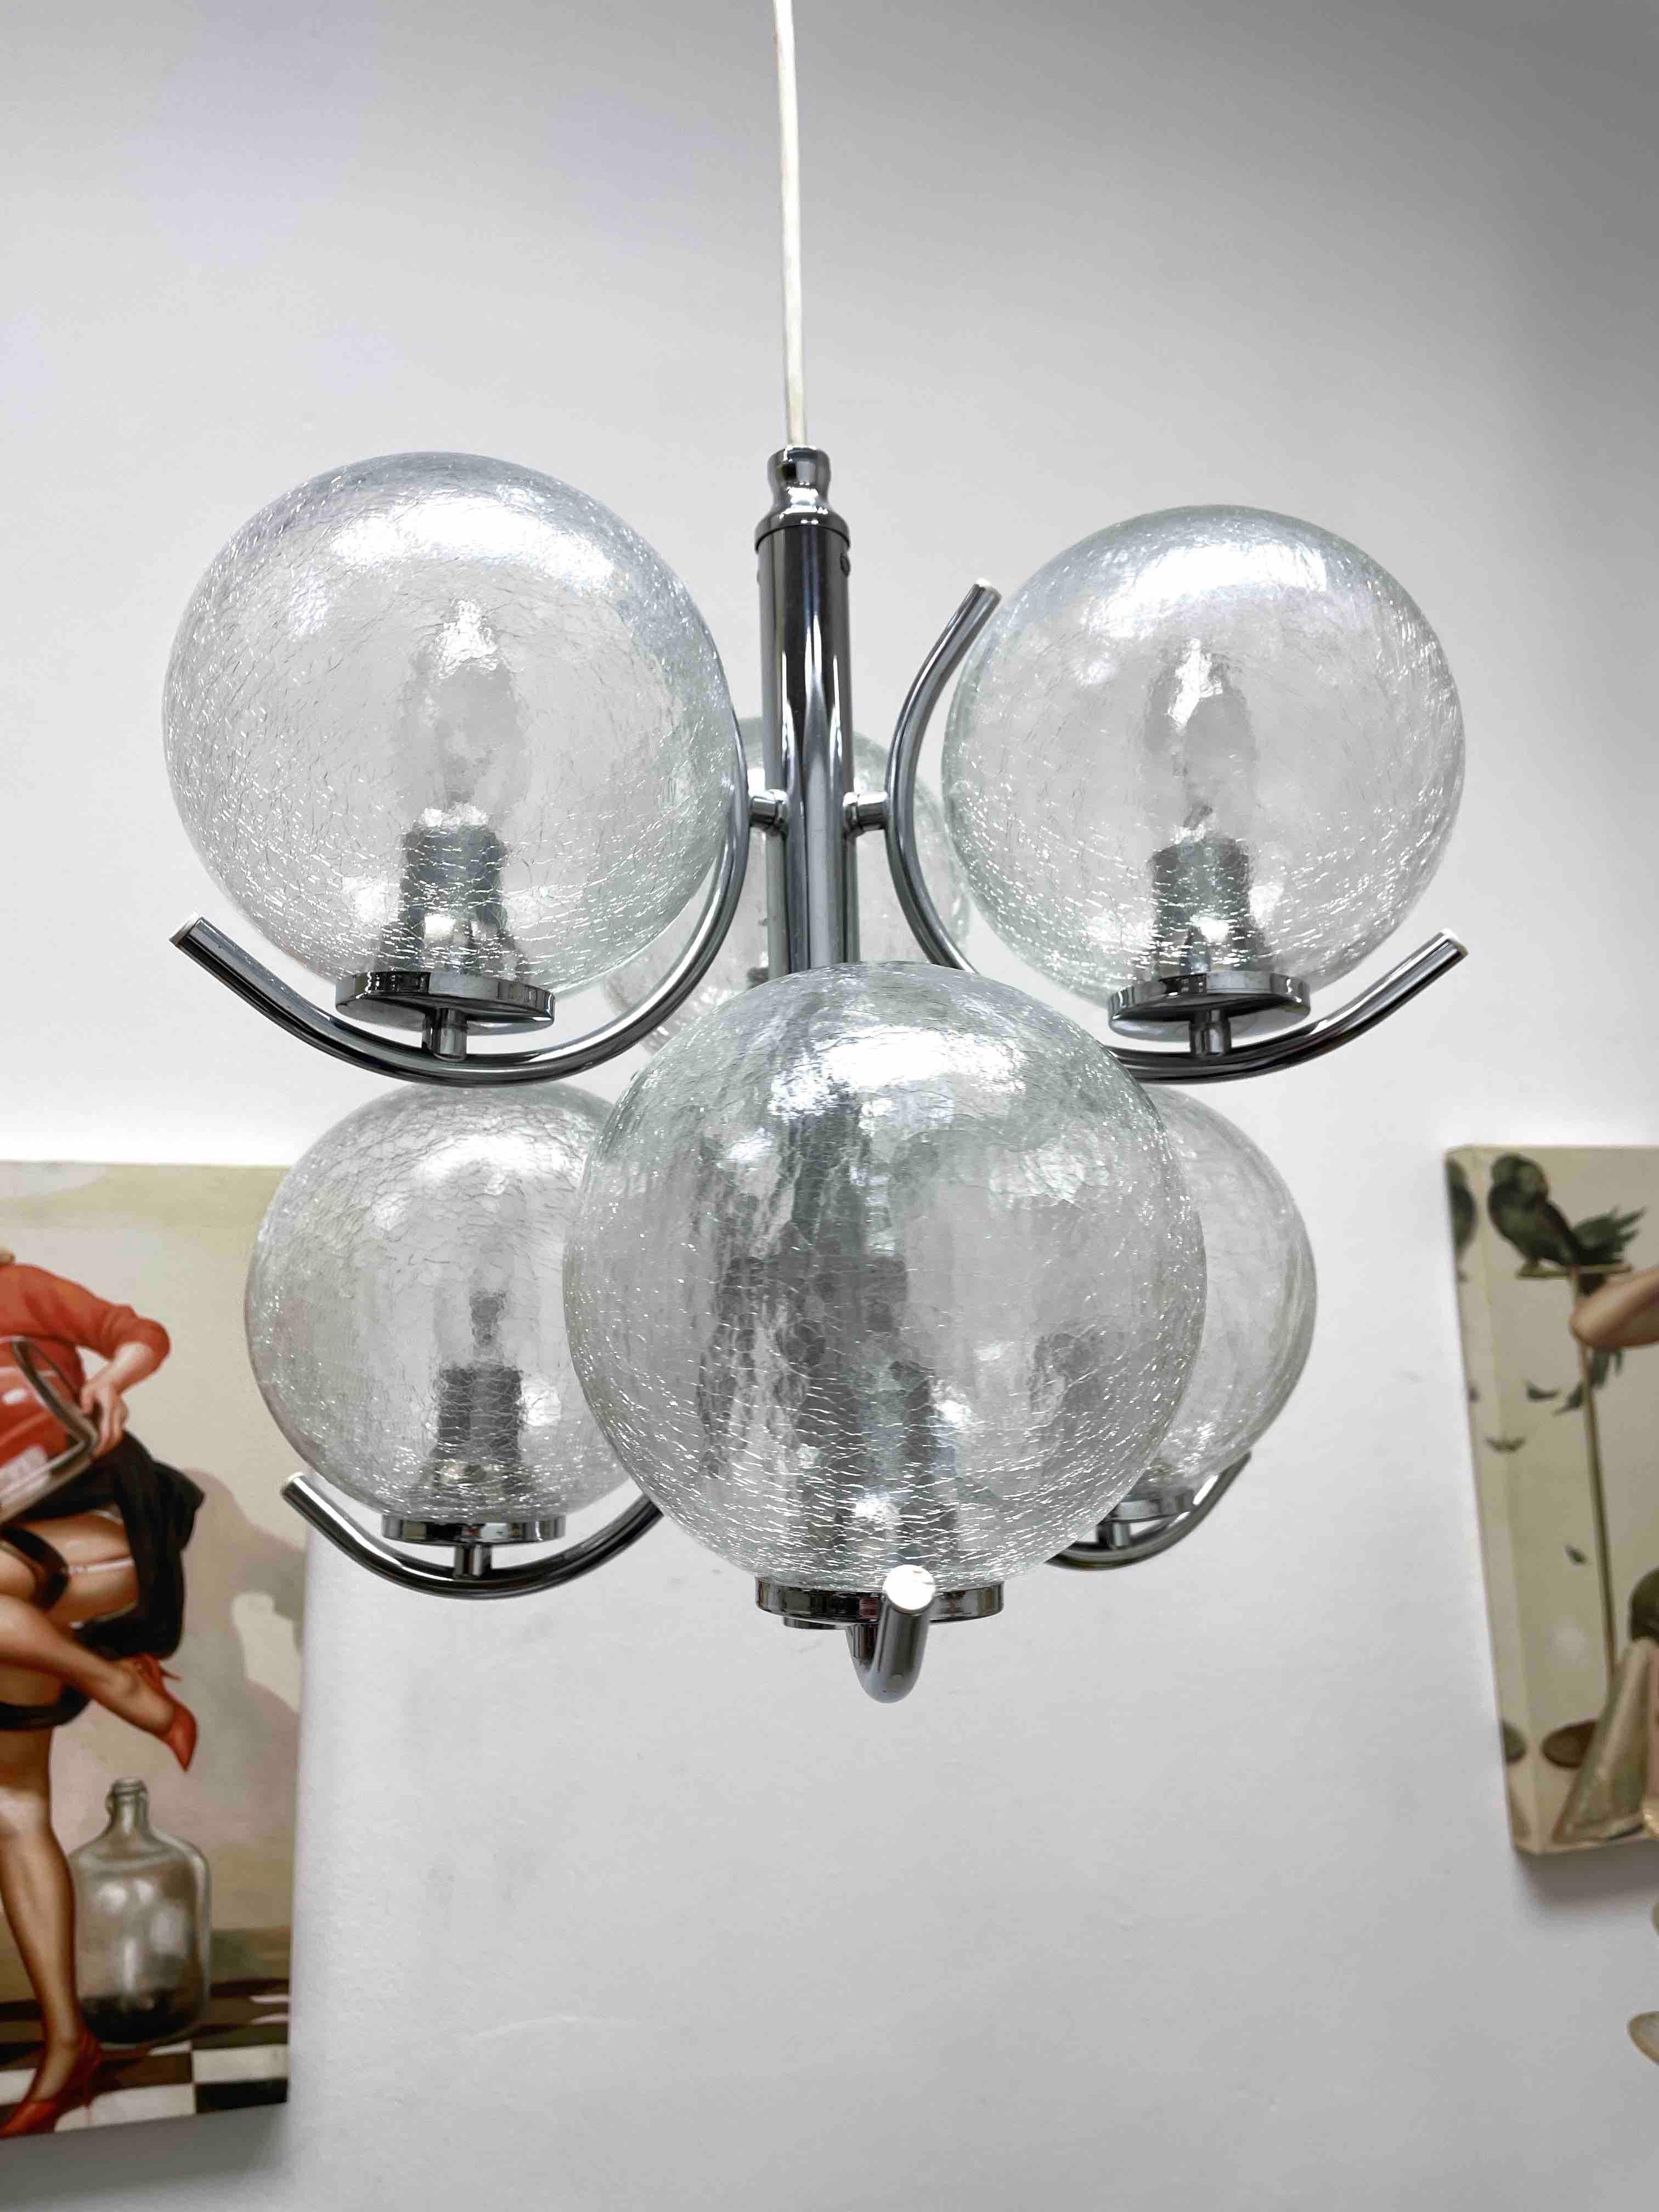 2 Tiered Richard Essig 6-Arm Space Age Chandelier, 1970s, Germany For Sale 1